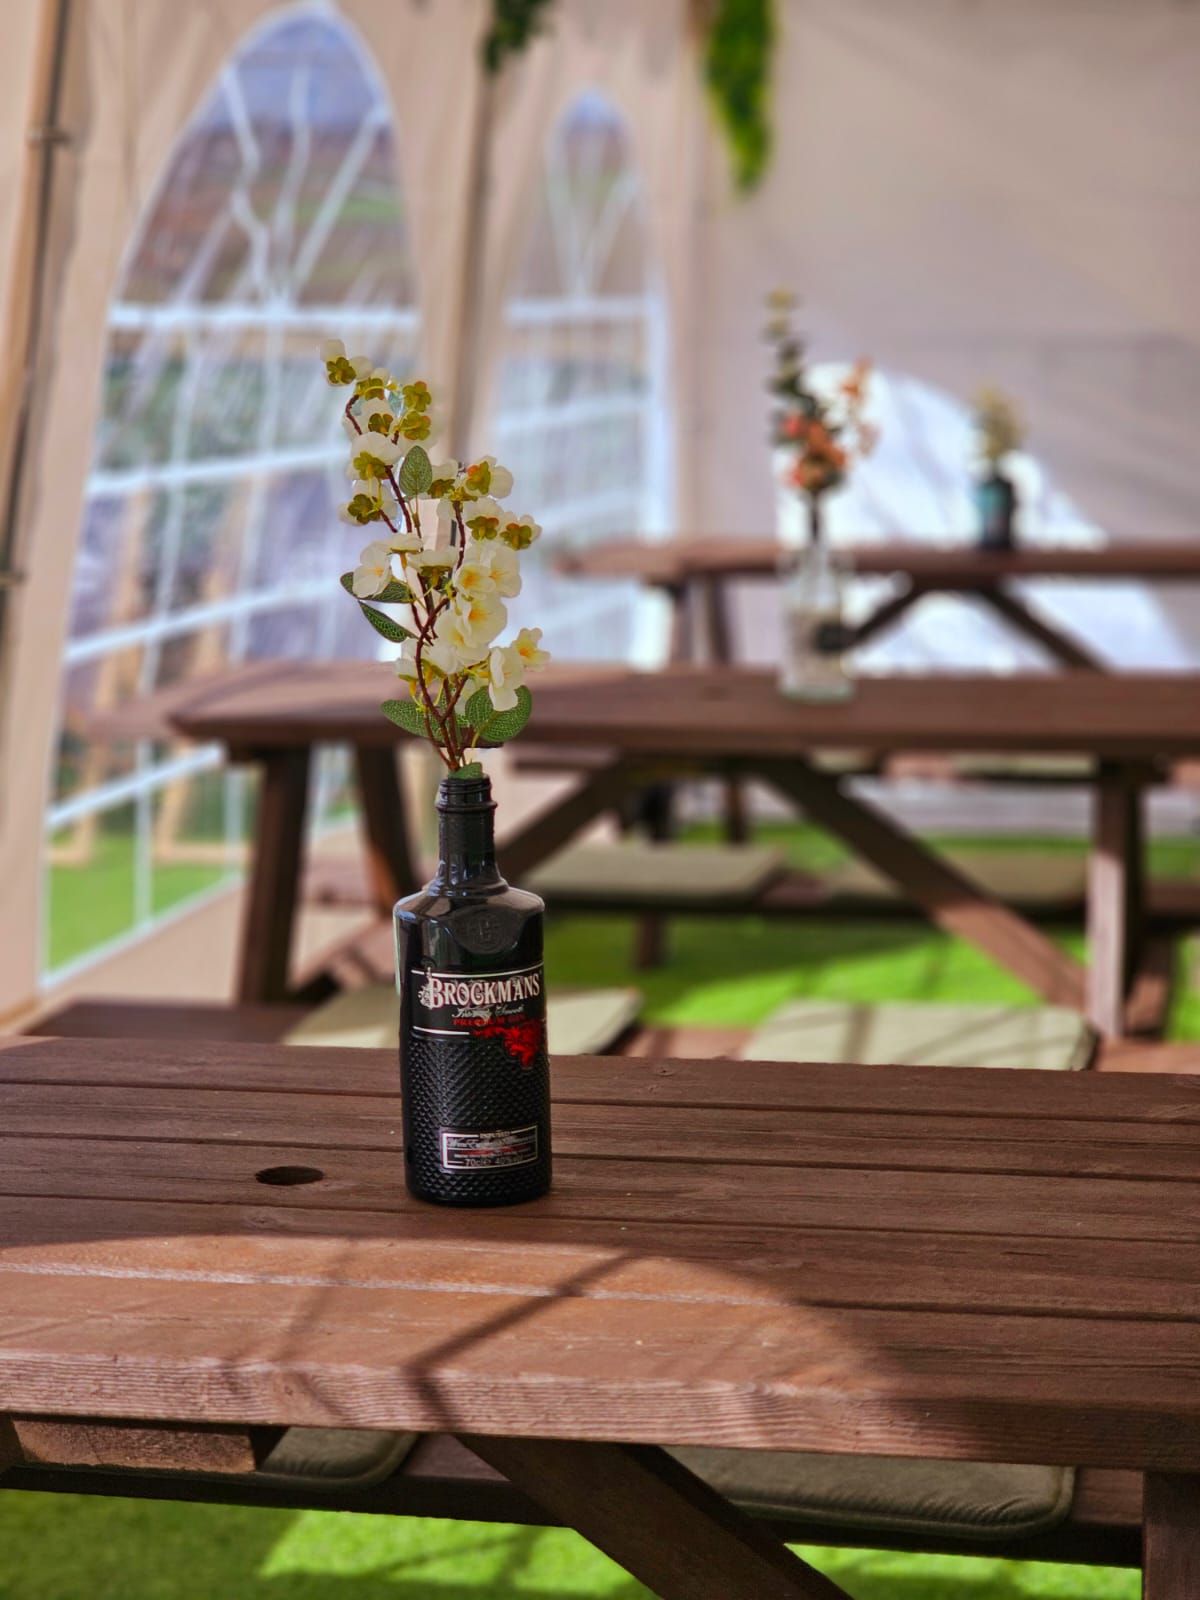 A beautiful floral display inside a gin bottle displayed on a bench in the Crown and Anchor marquee